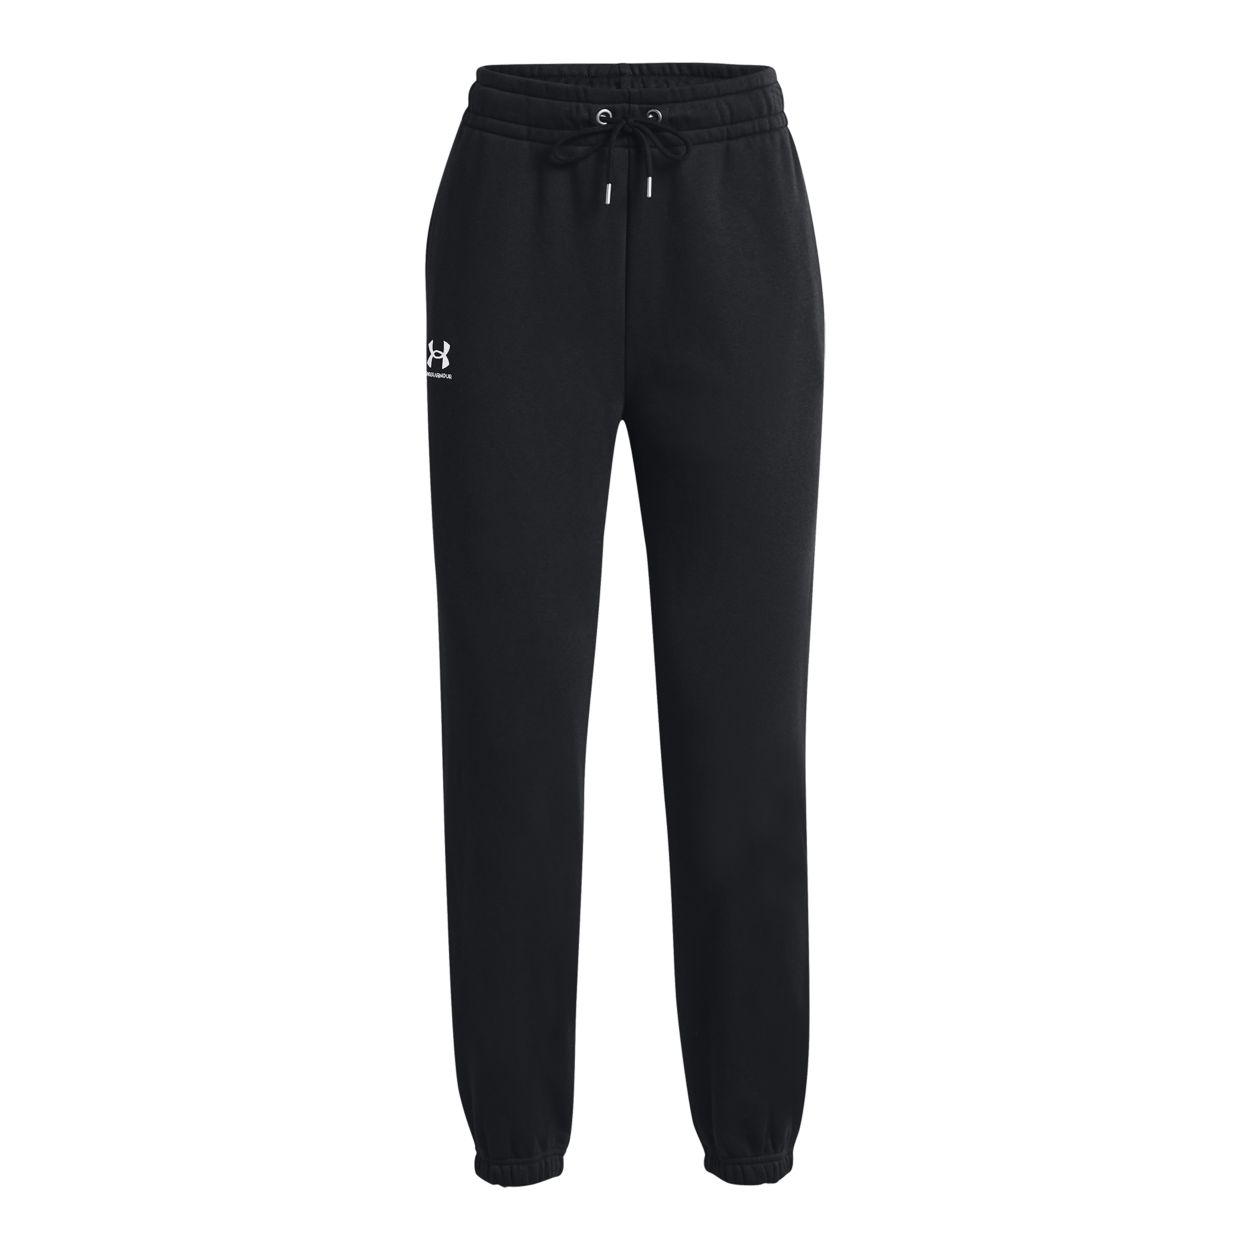  Under Armour Womens Tall Size Rival Fleece Joggers